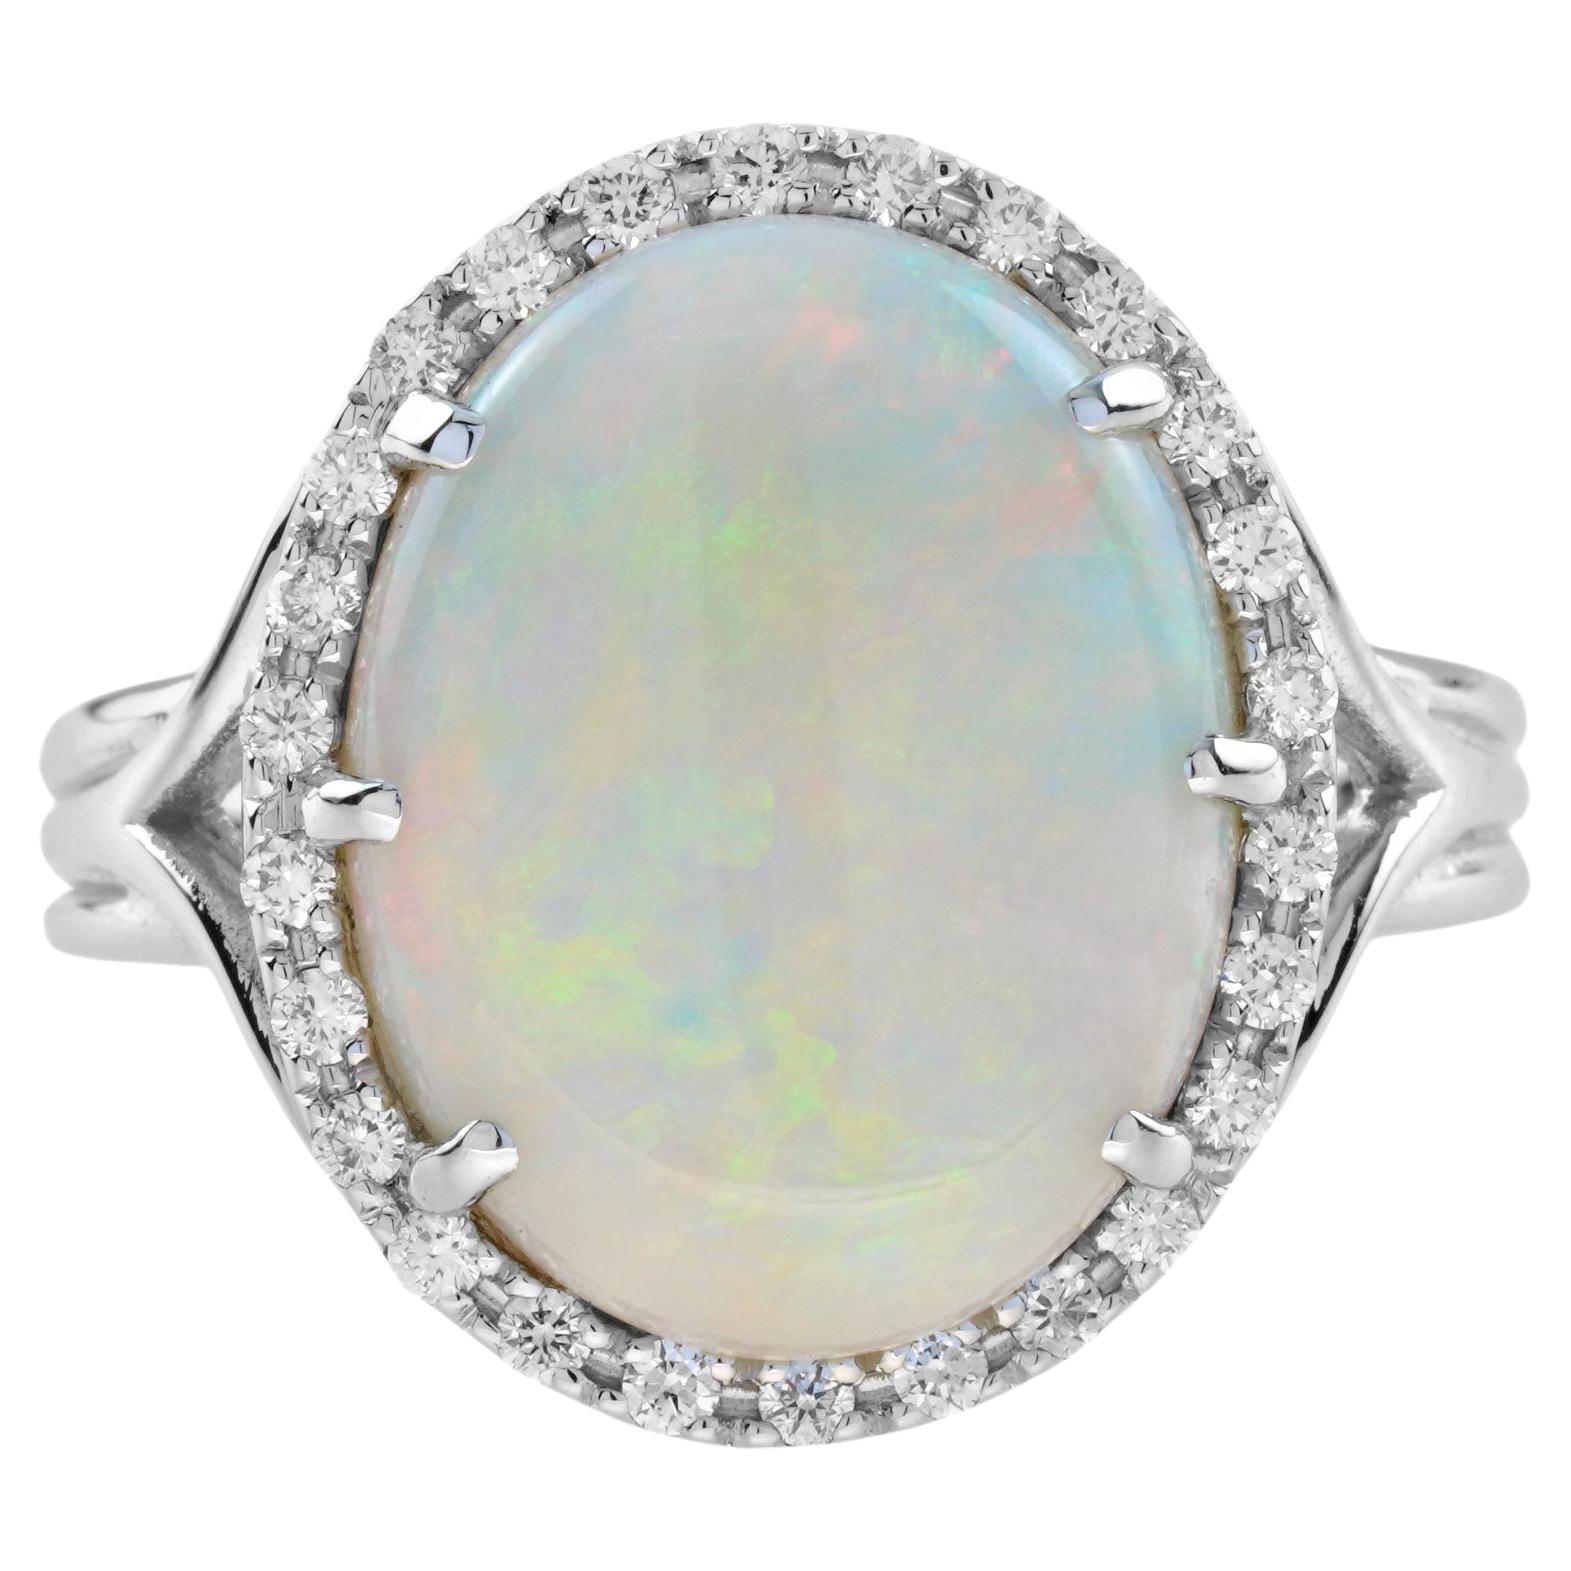 4.22 Ct. Opal and Diamond Vintage Style Cocktail Ring in 18K White Gold